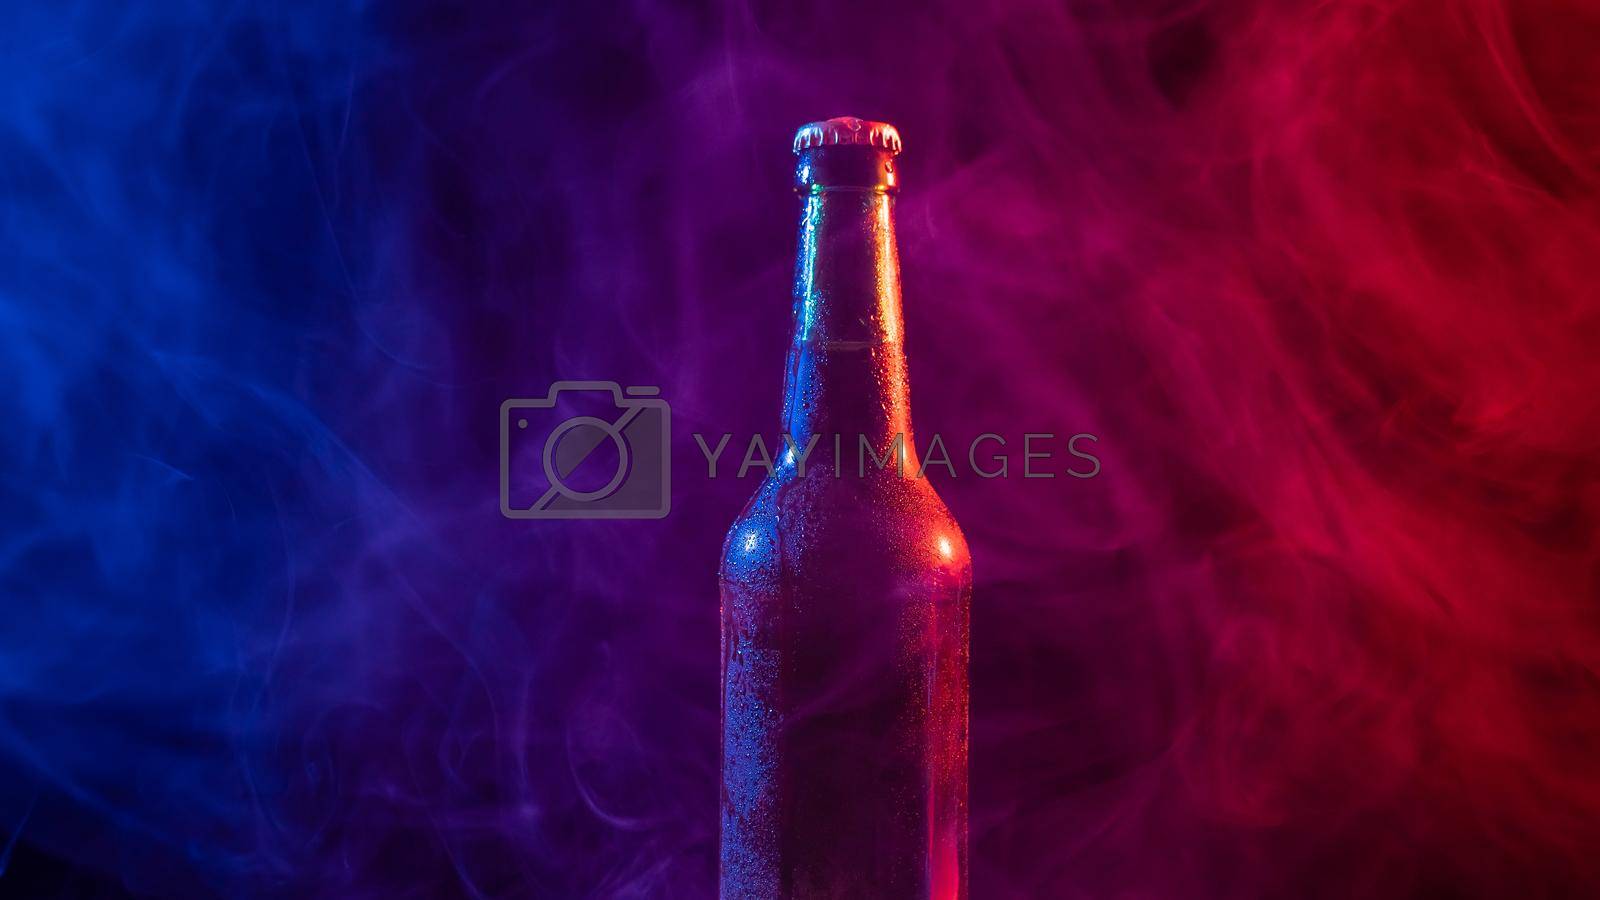 Royalty free image of Glass bottle of beer in blue pink mist by mrwed54